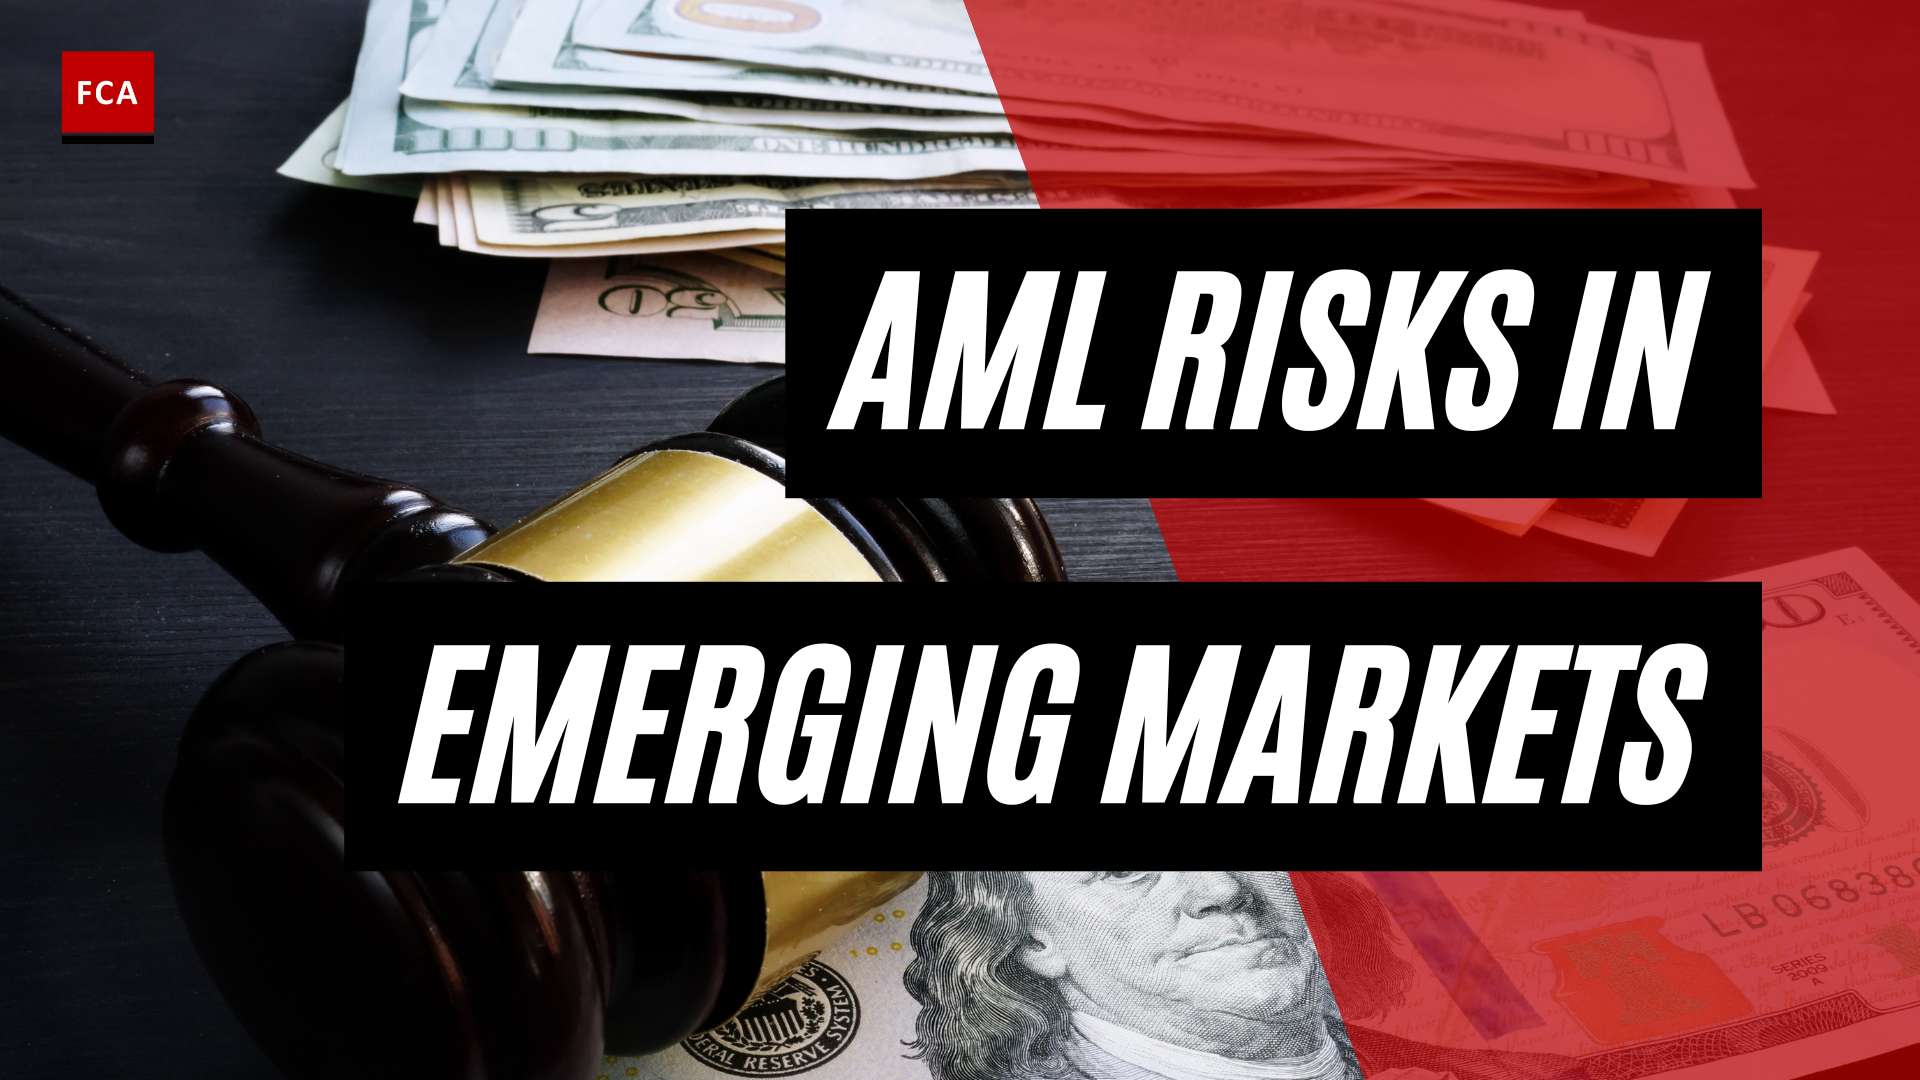 The Real Deal: Aml Compliance Risks In Emerging Markets Uncovered